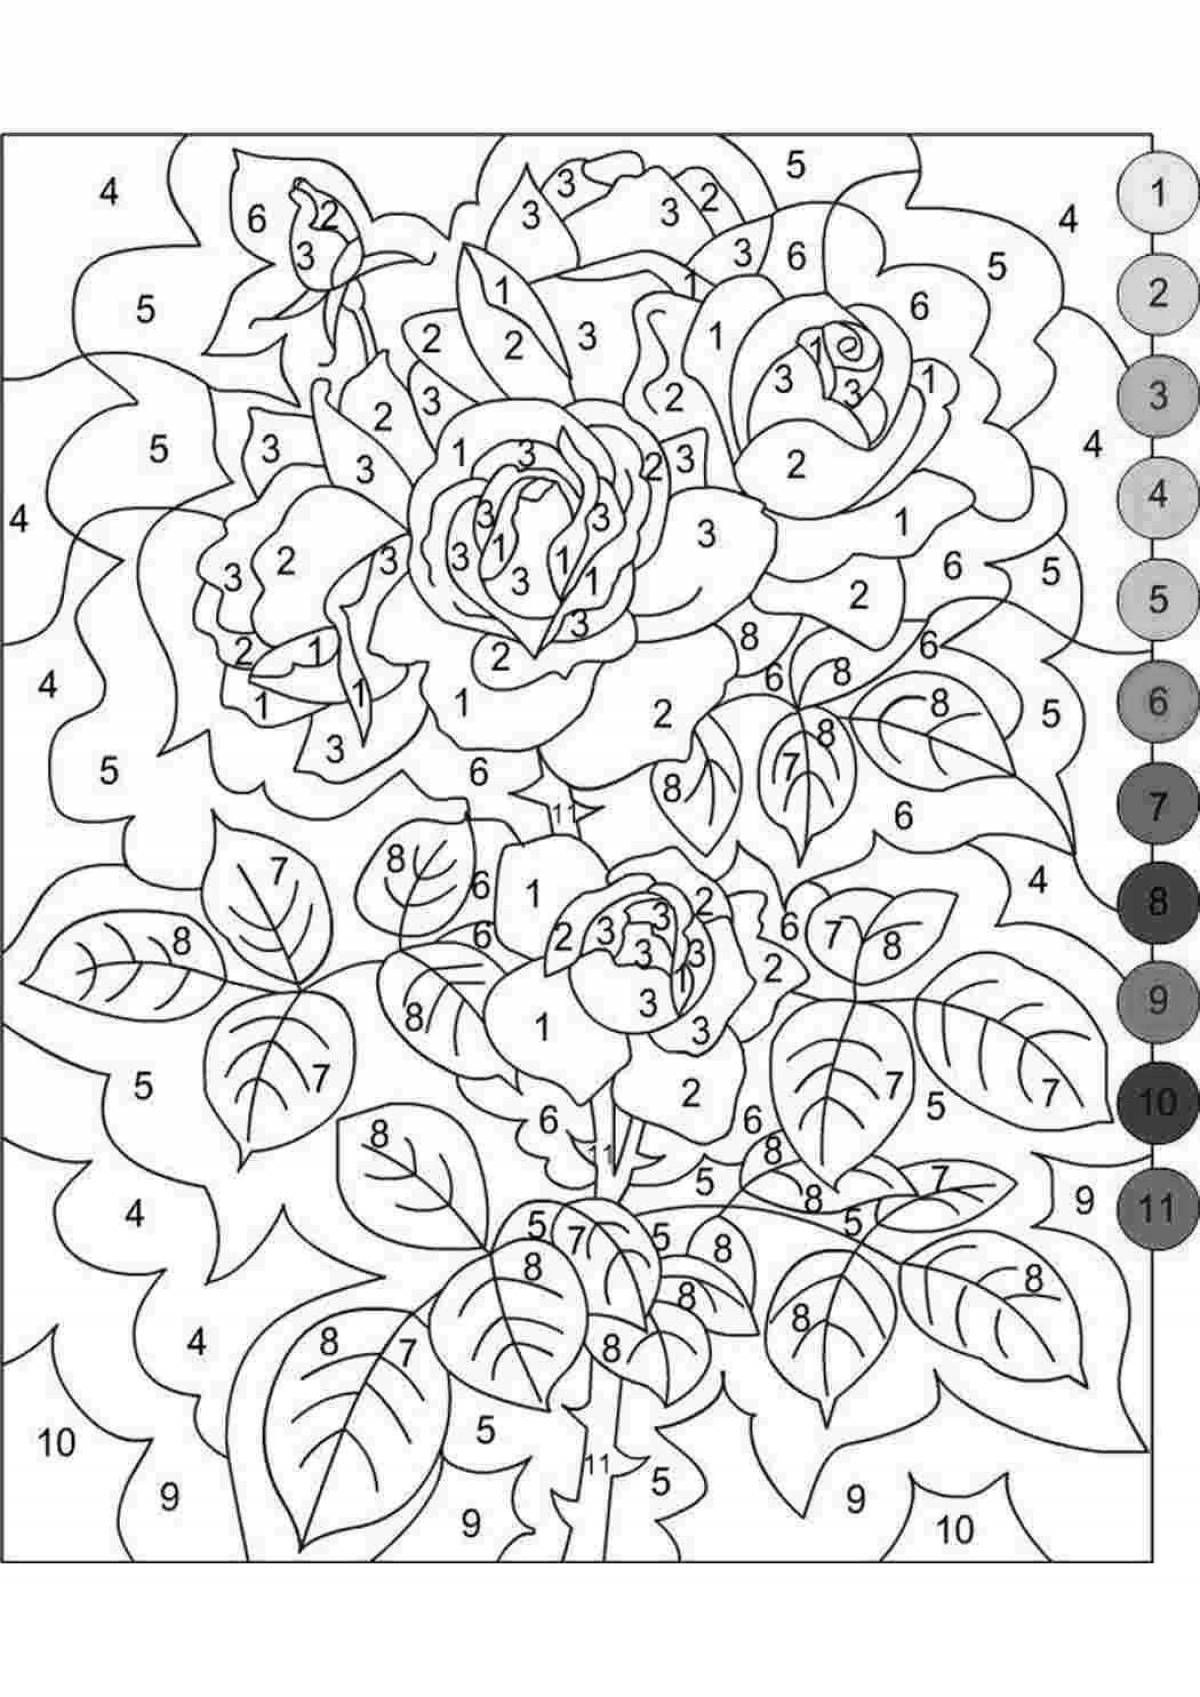 Attractive number coloring page